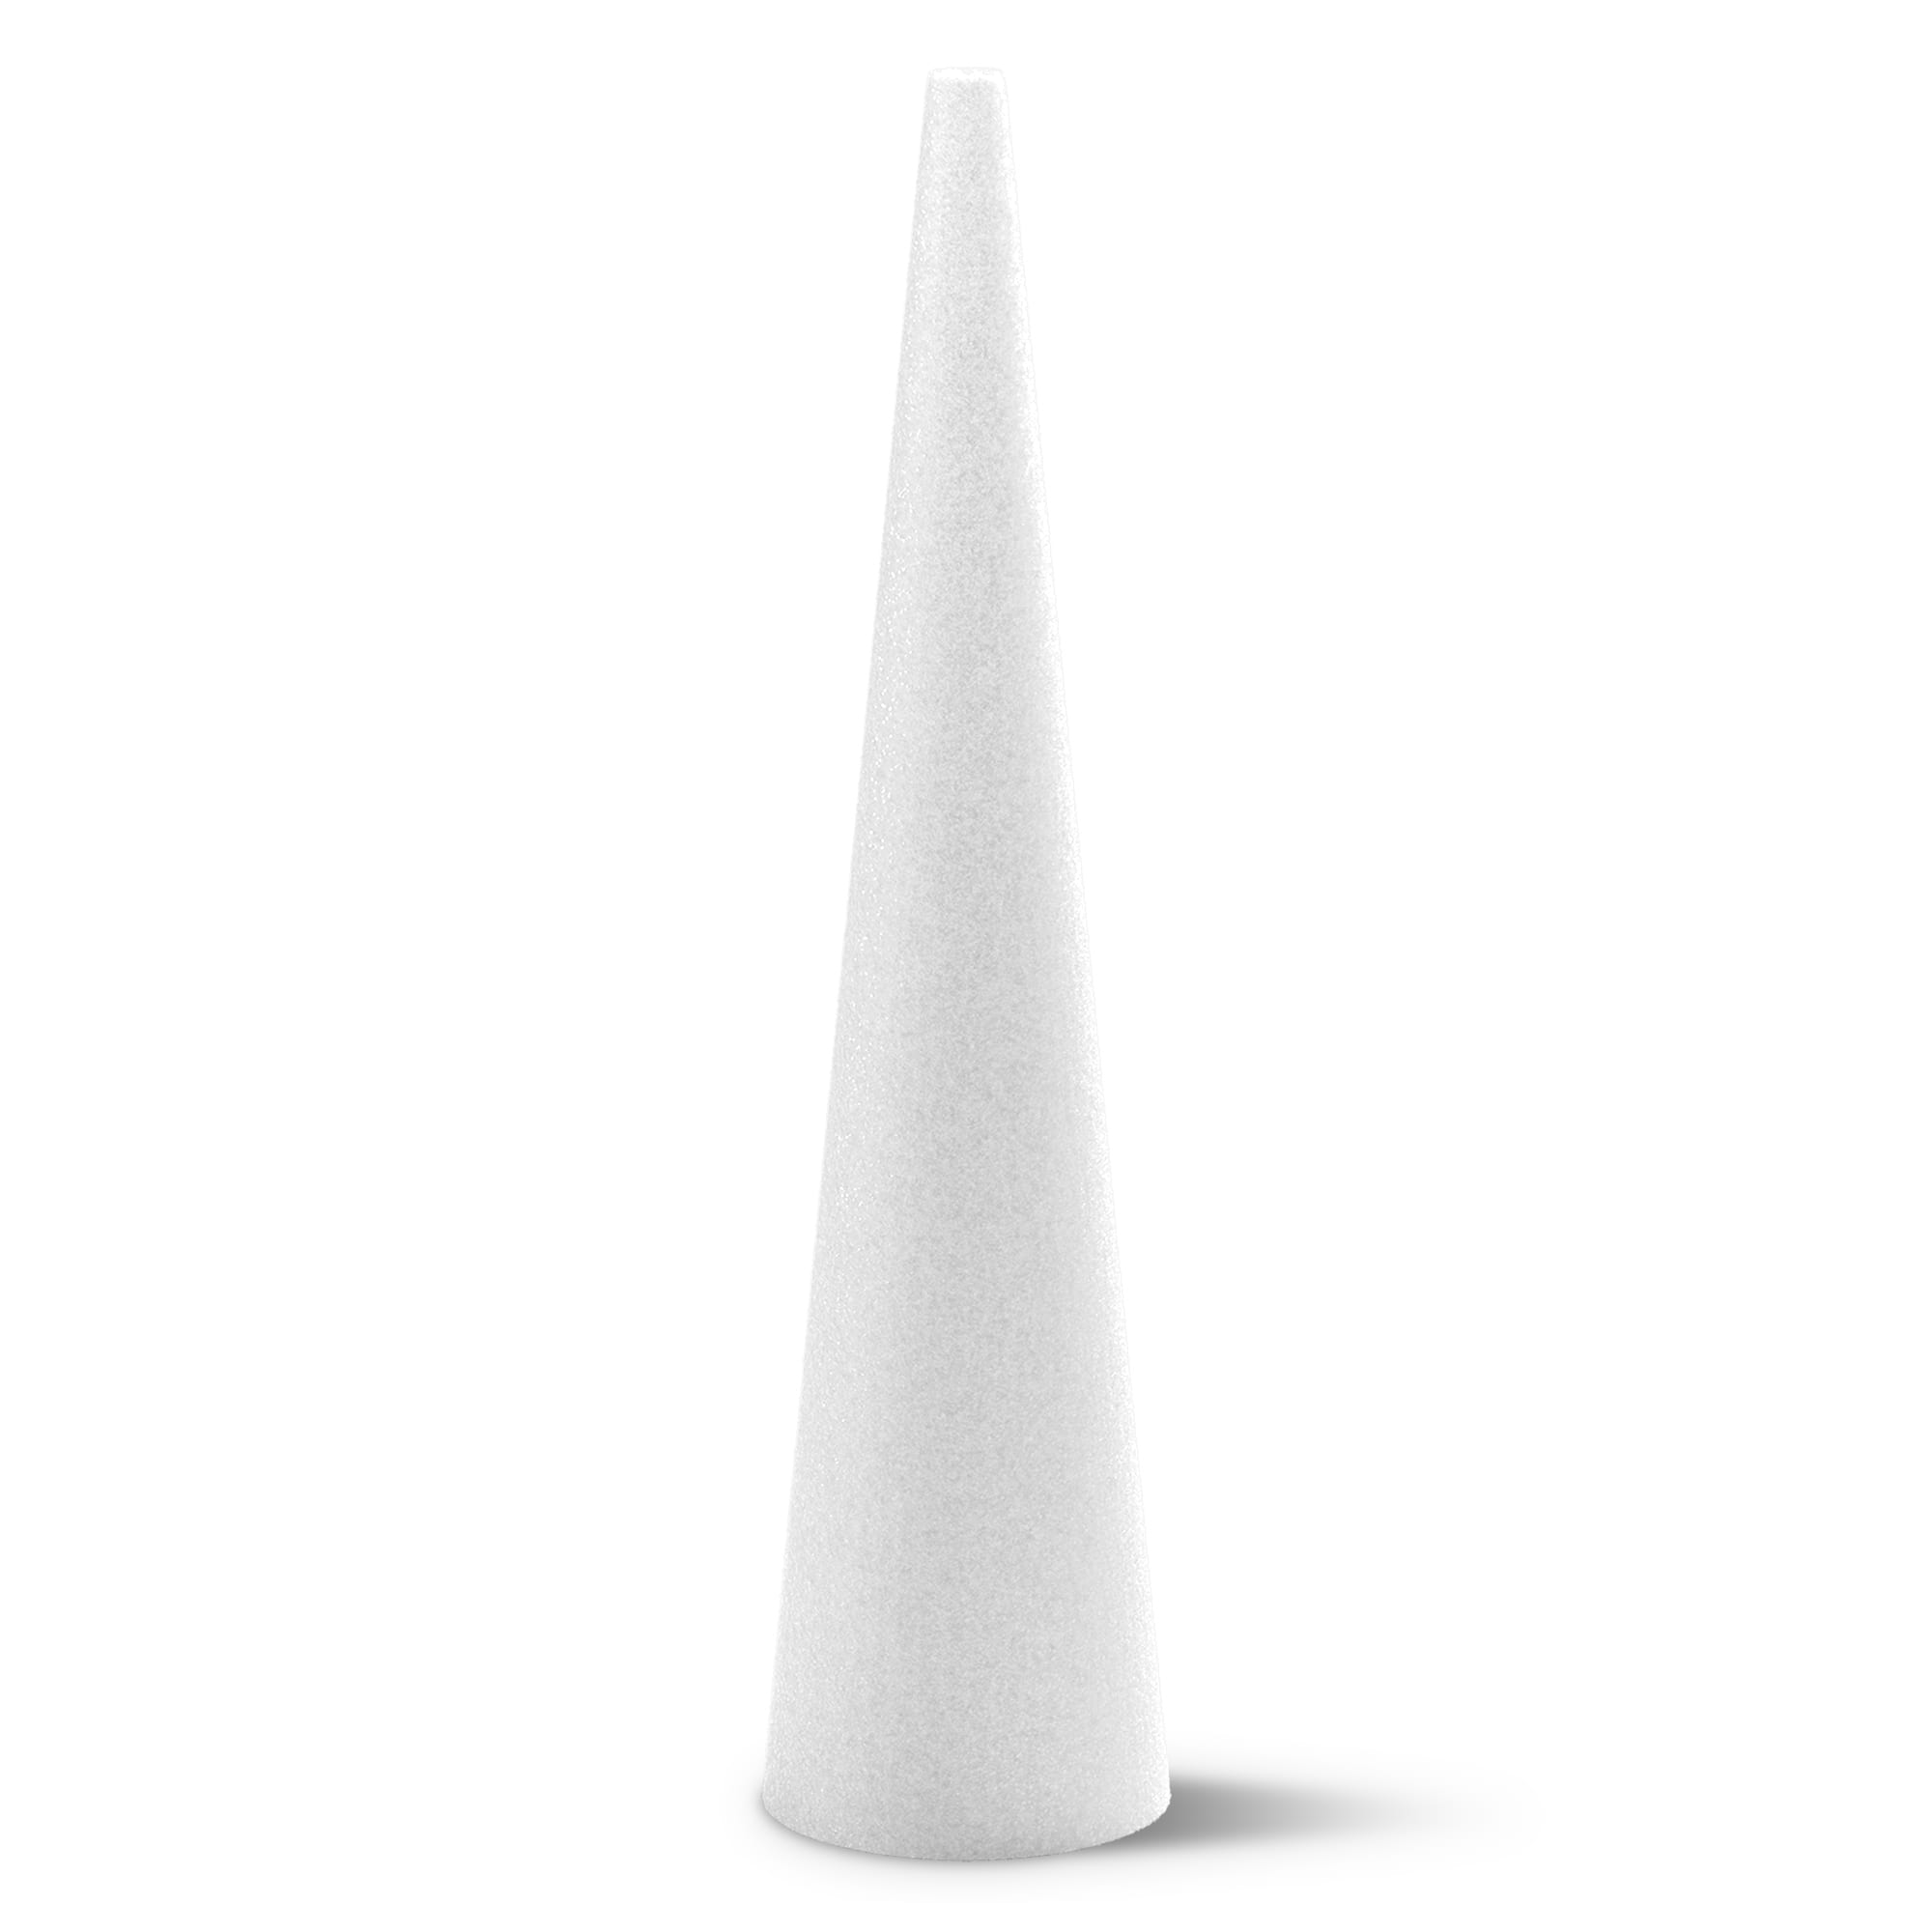 FloraCraft Packaged Styrofoam Cones, 12-Inch-by-4-Inch Cone, White